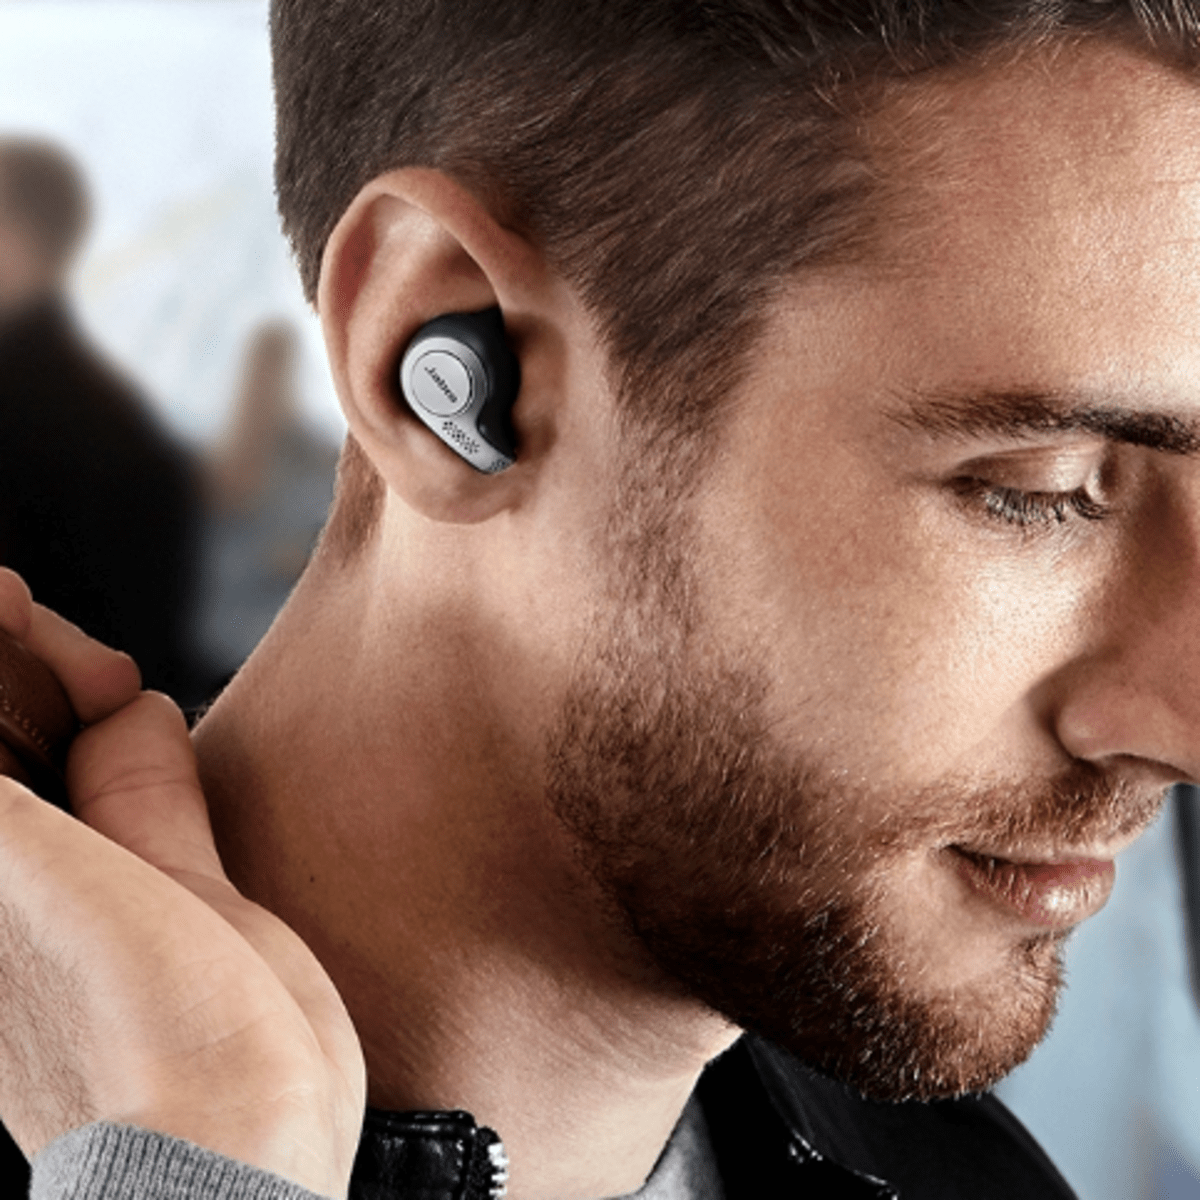 Jabra Enhance Plus: Why these OTC hearing aids are among the best of 2022